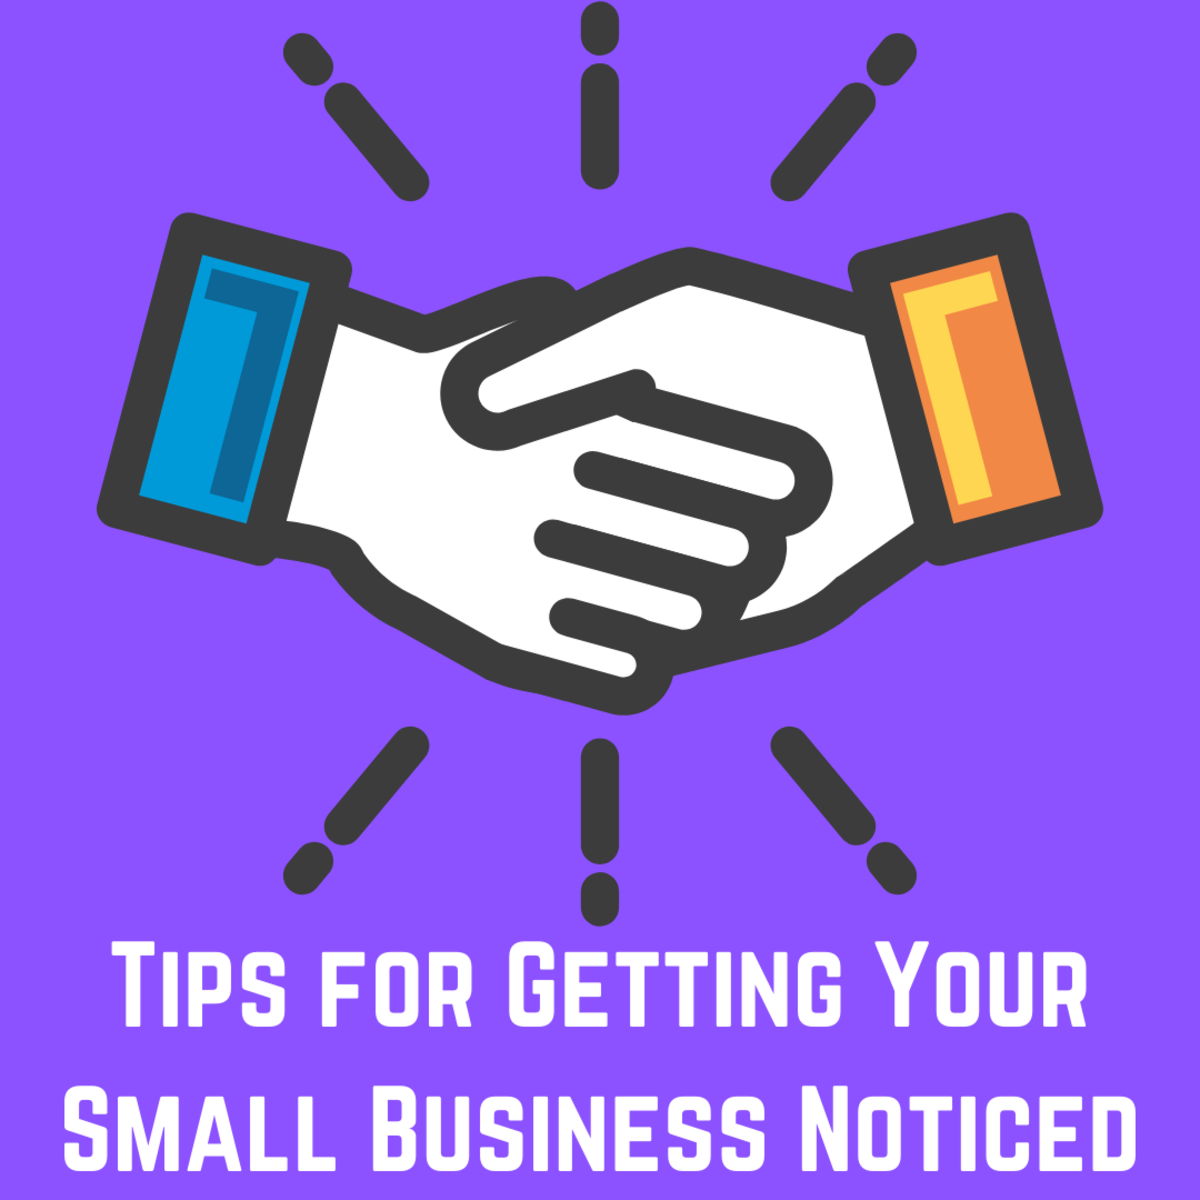 Read on to learn how to get more attention to your small business. 